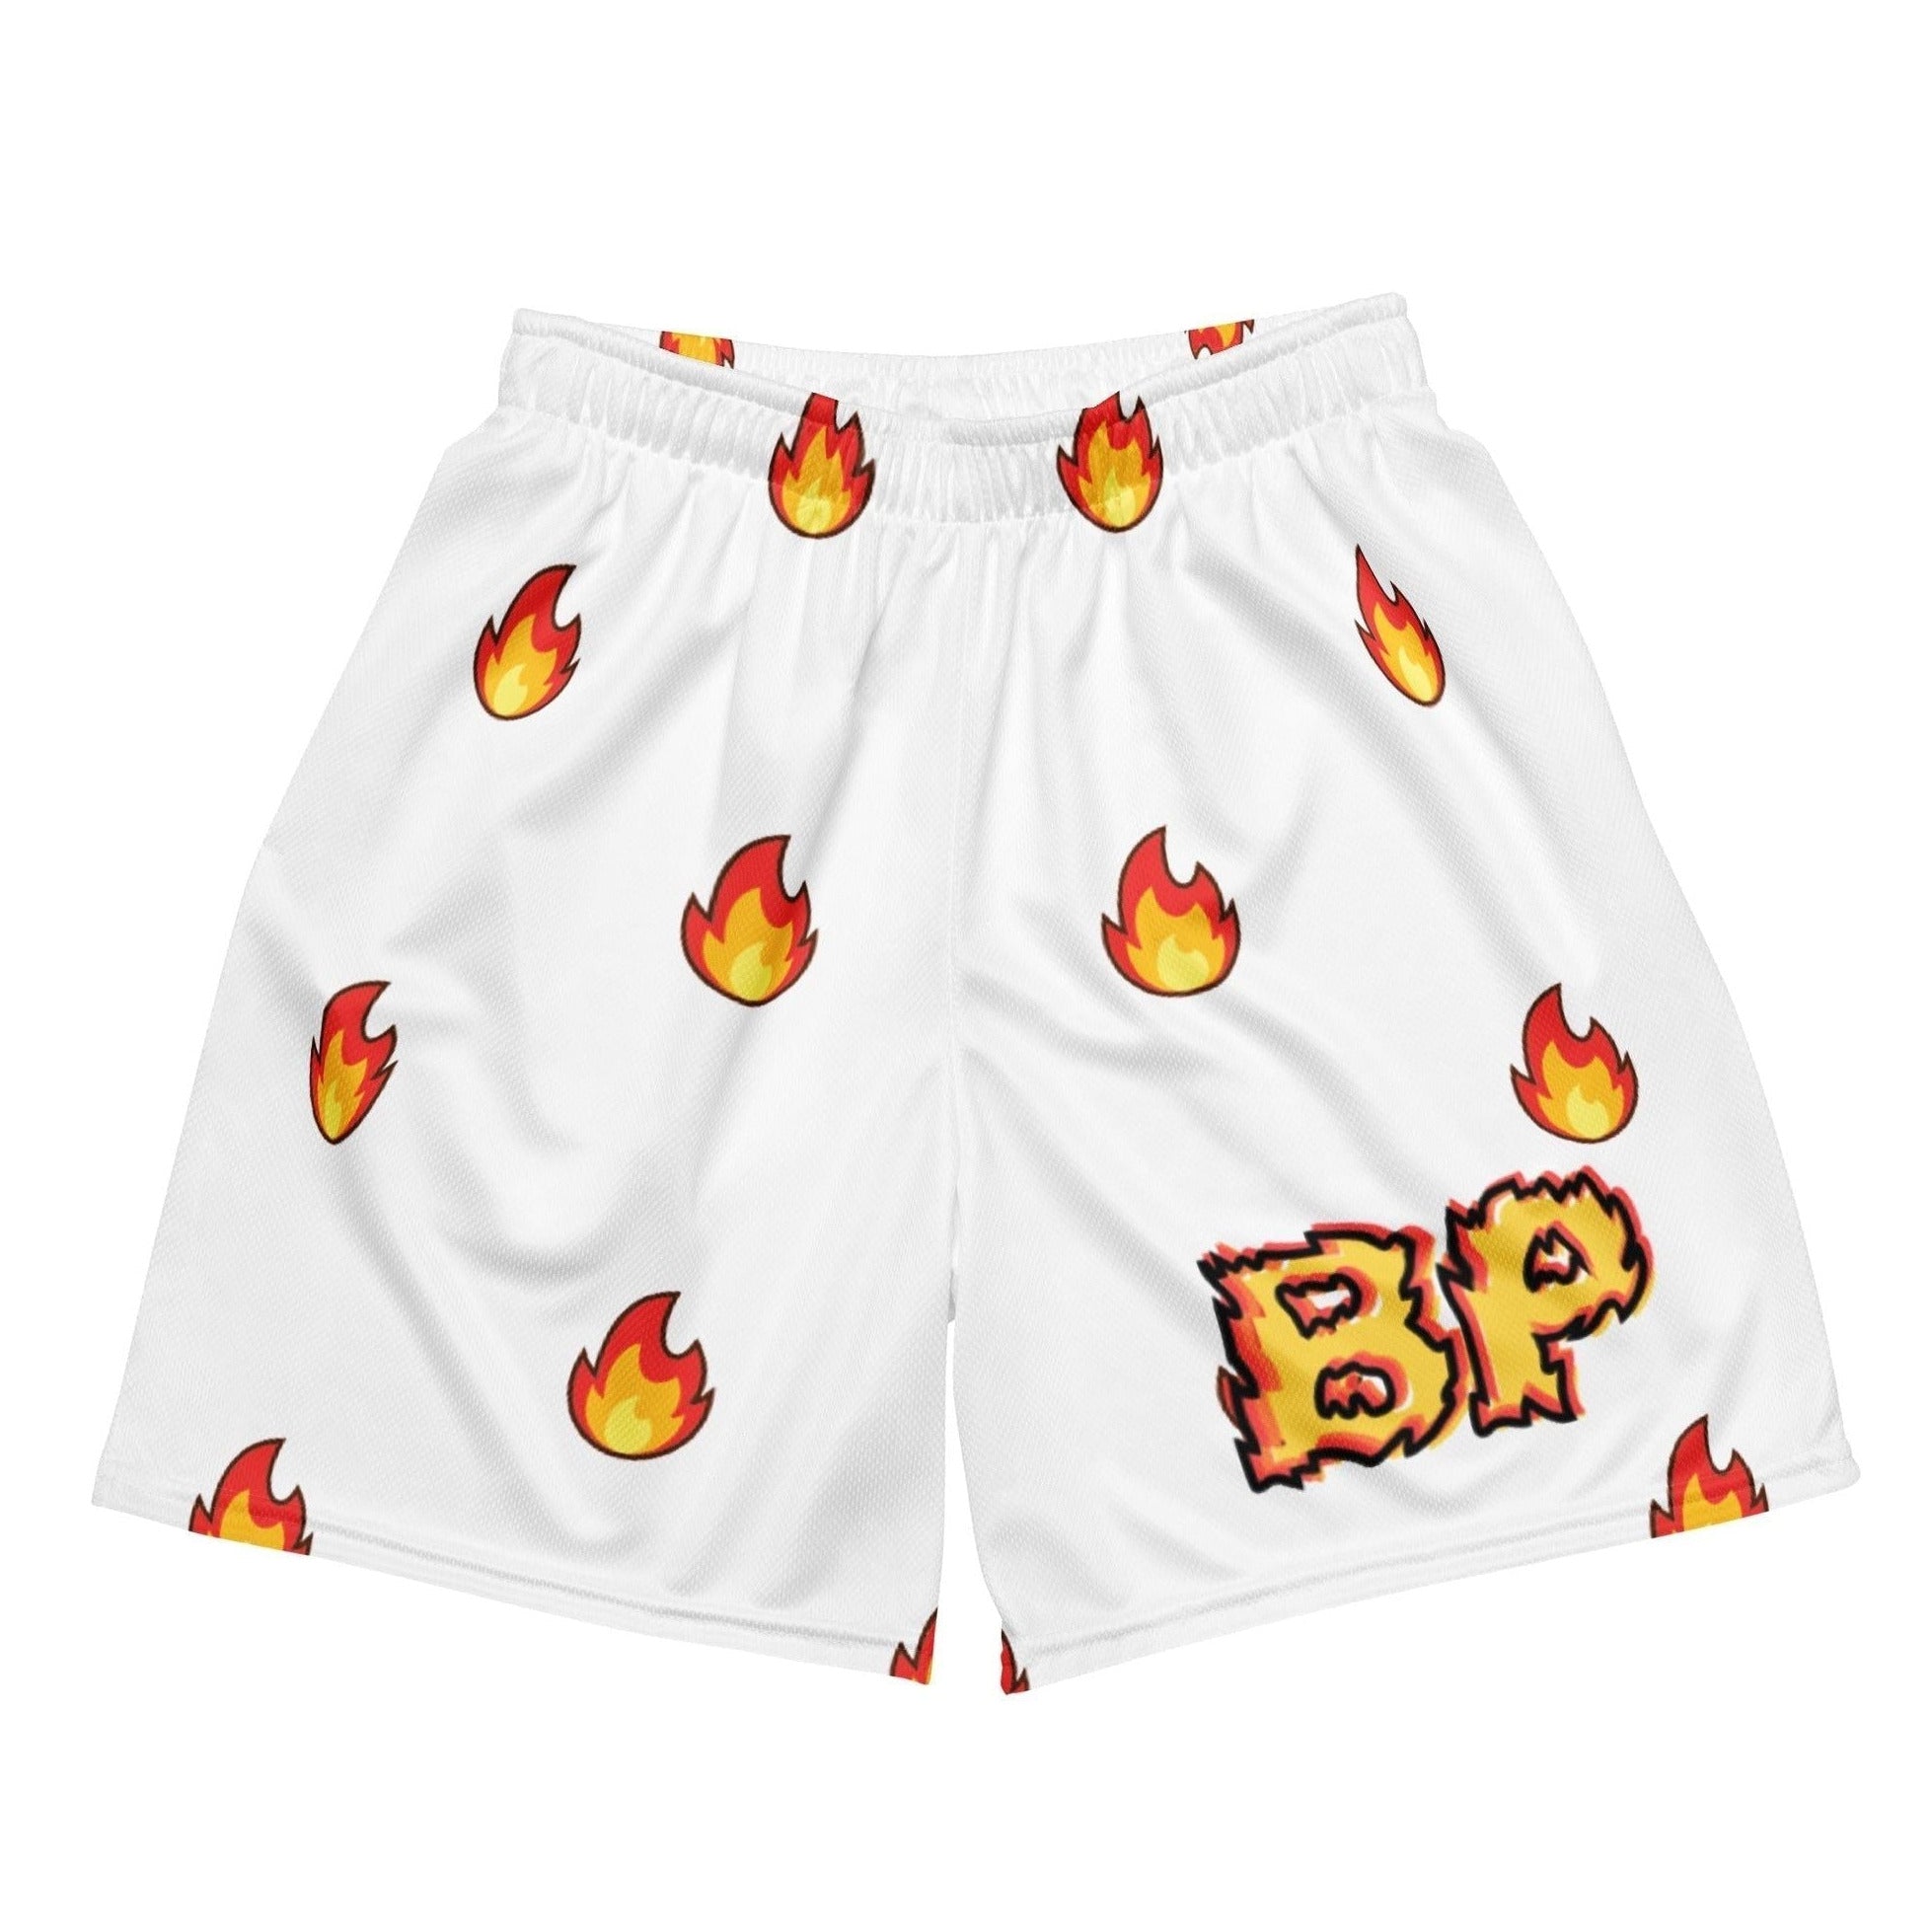 Fuel The Fire Mesh Shorts - Bad Product